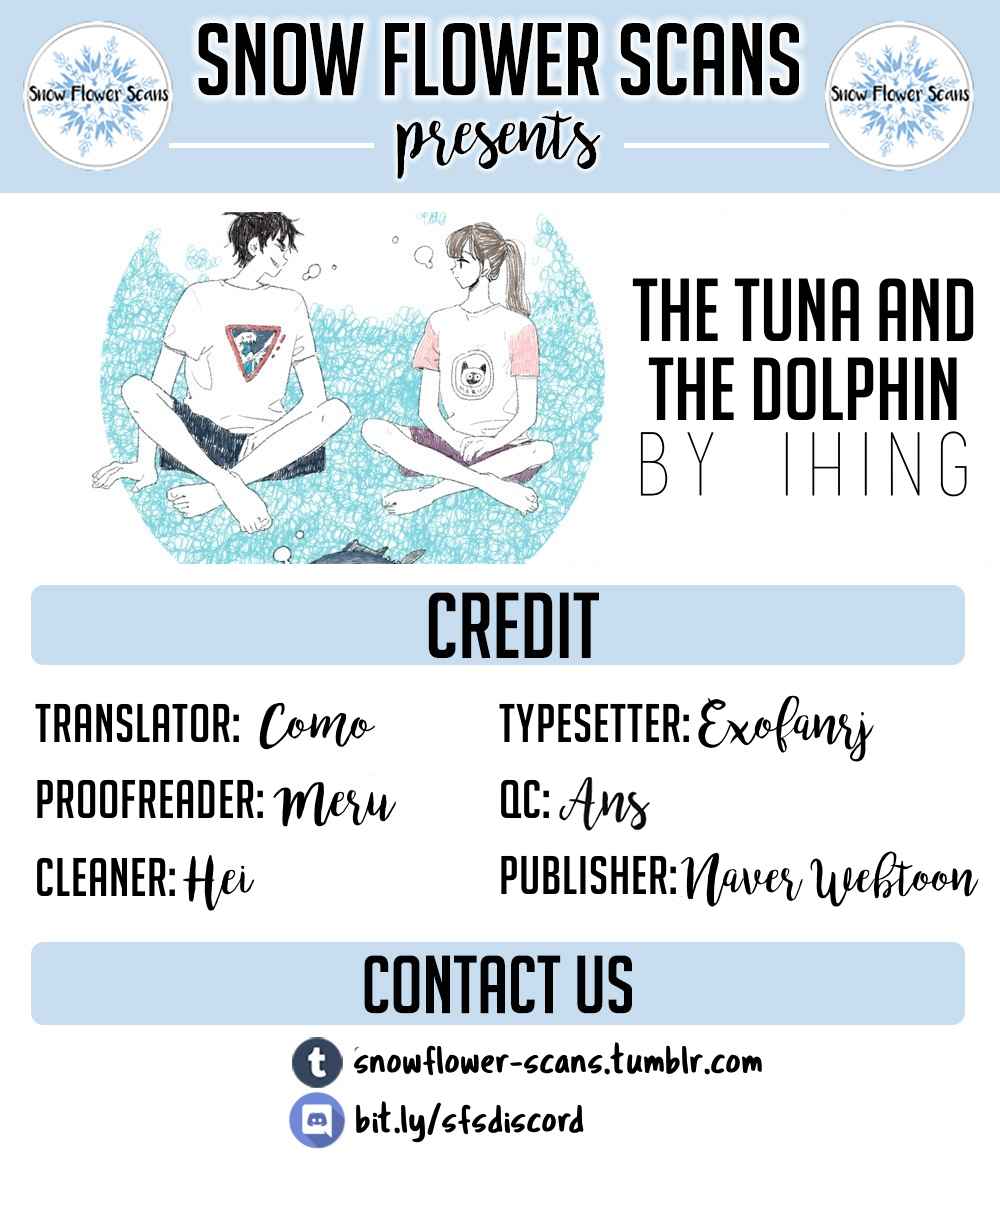 The Tuna and the Dolphin Ch. 13